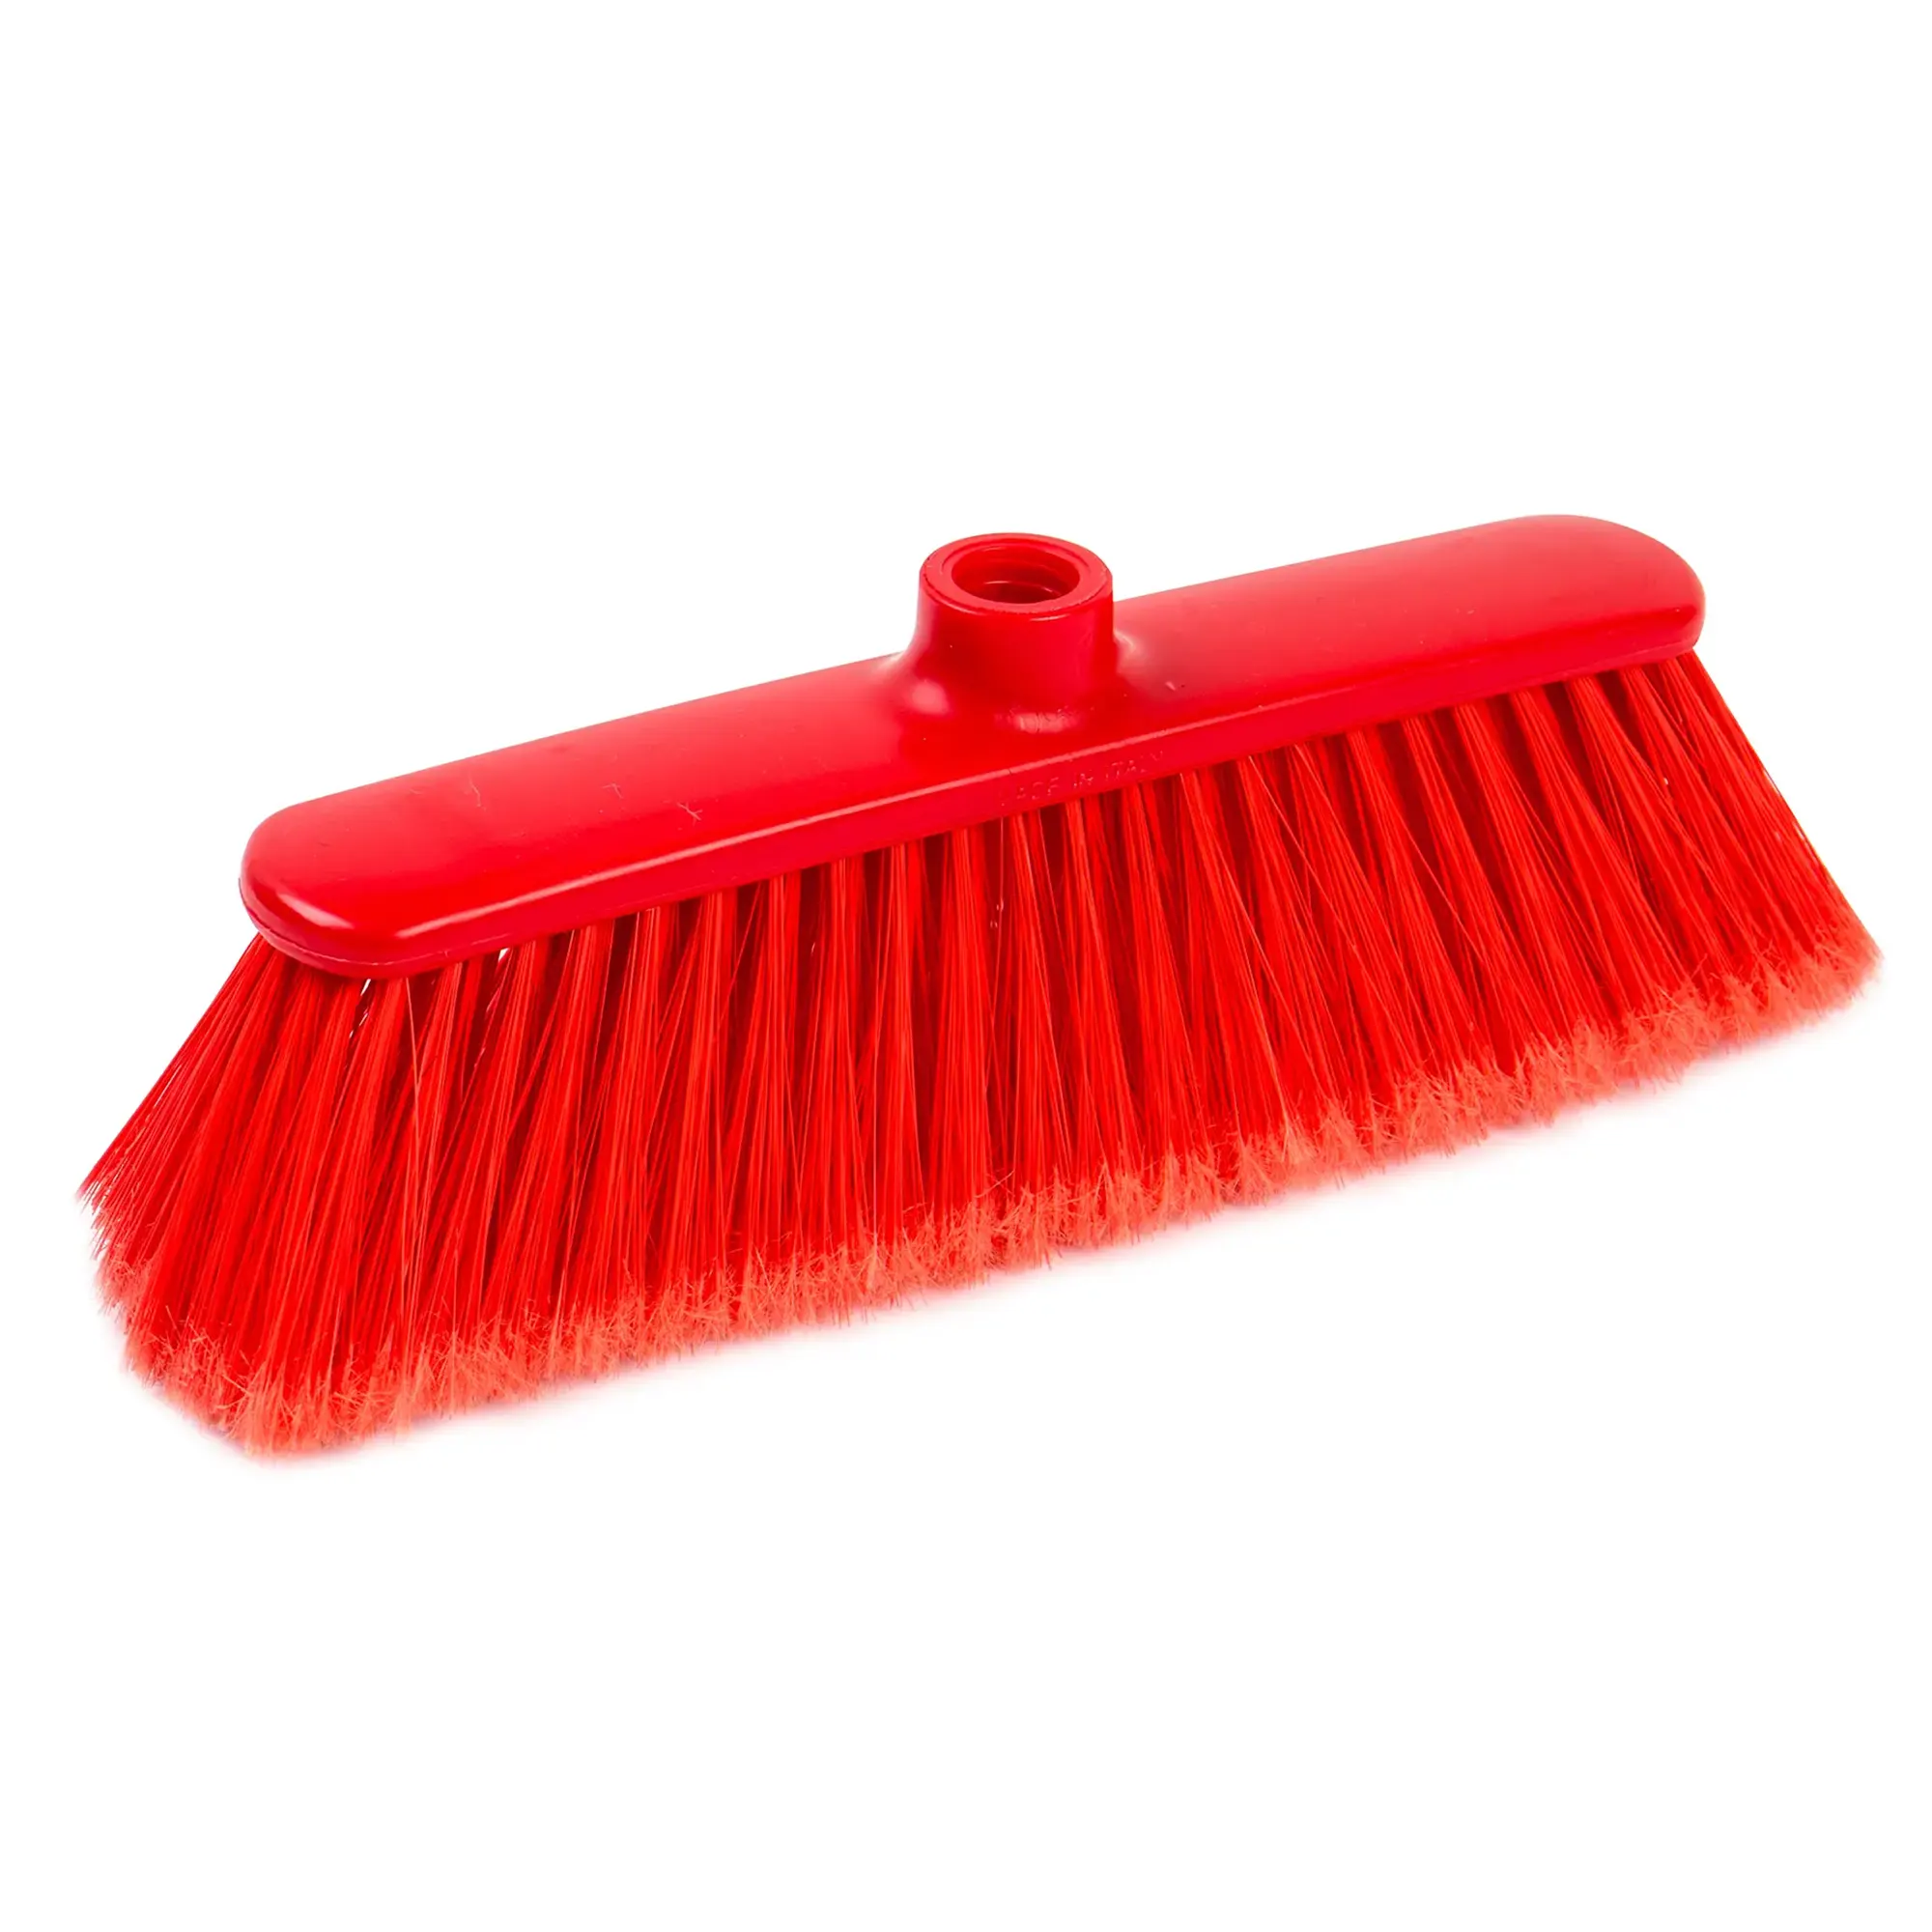 mary colored broom - Luxor Brushes